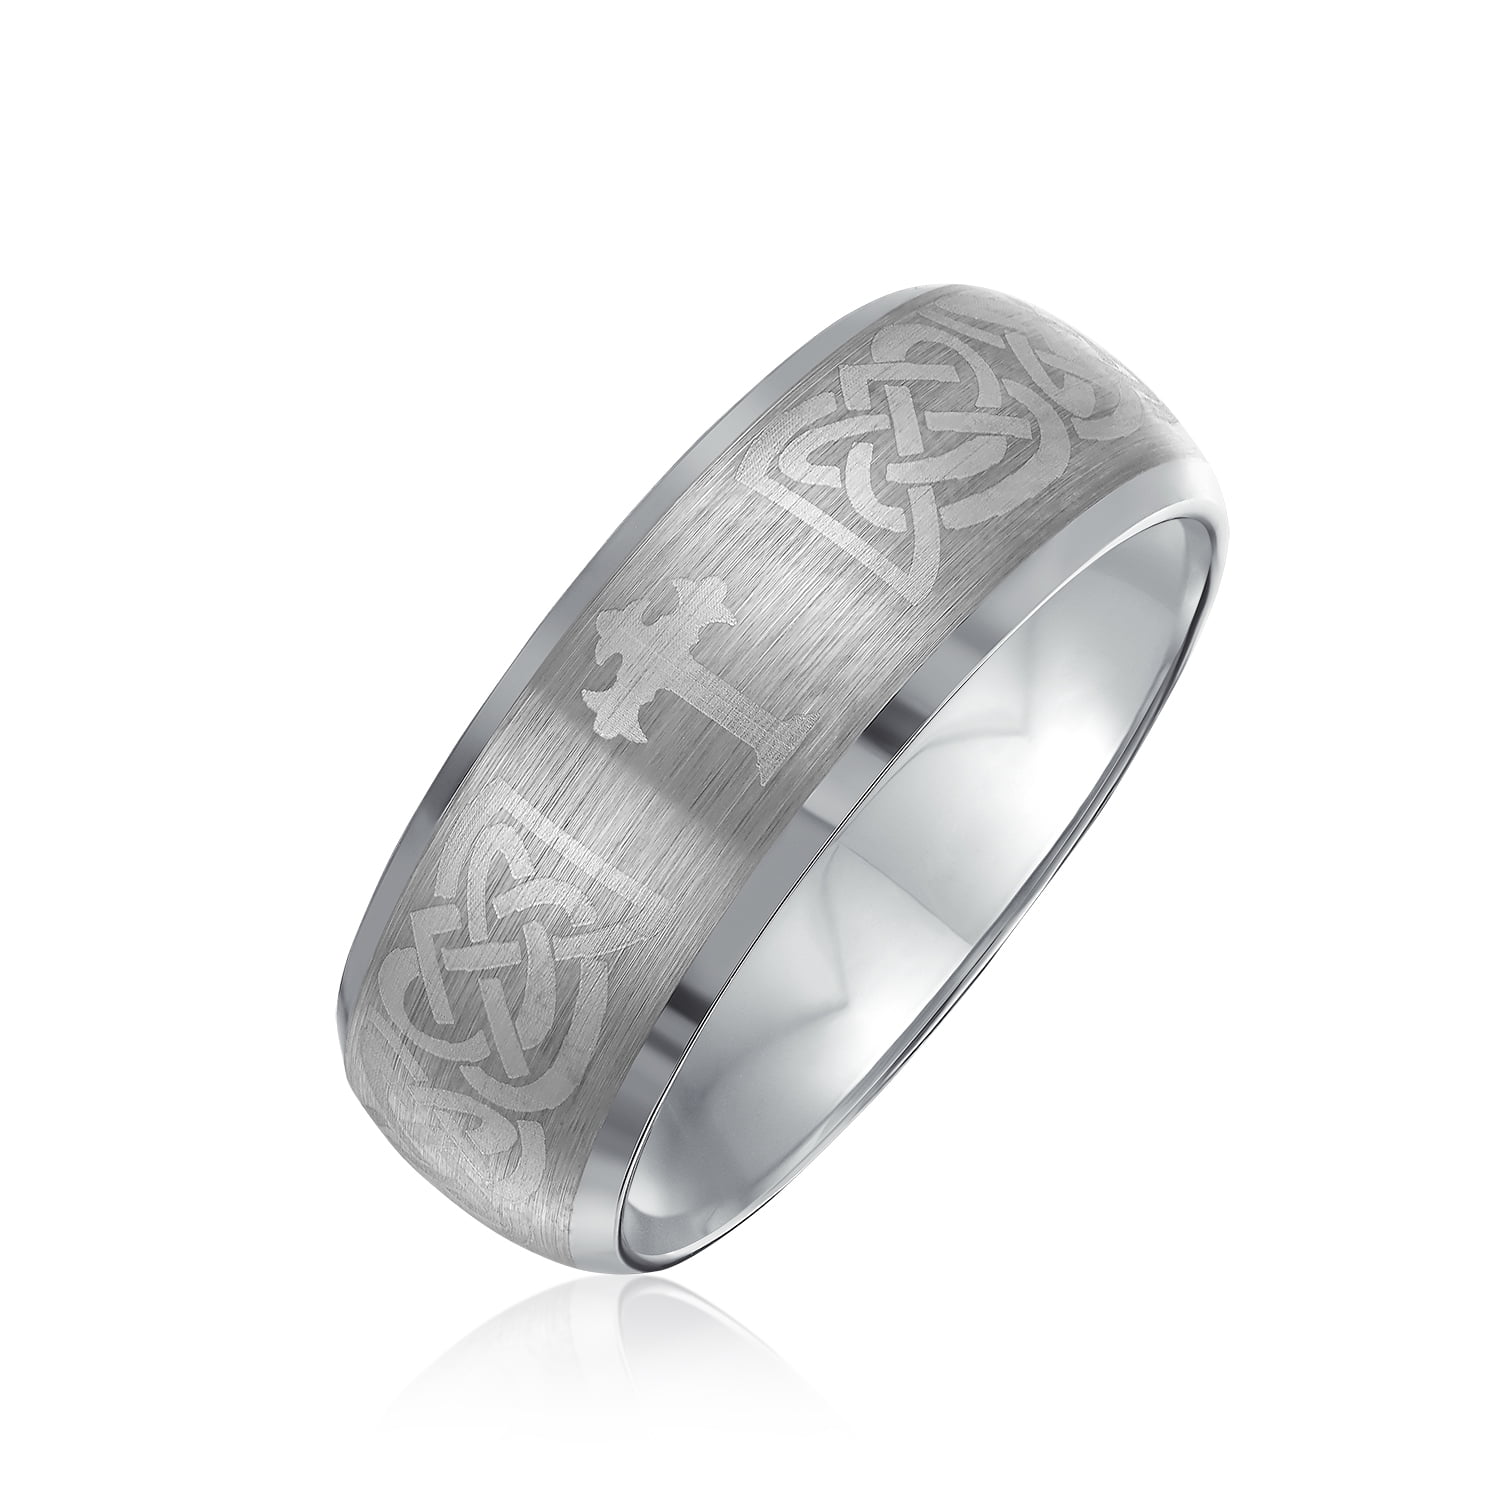 Details about   Stainless Steel and Wide Black Rubber Inlay Ring 